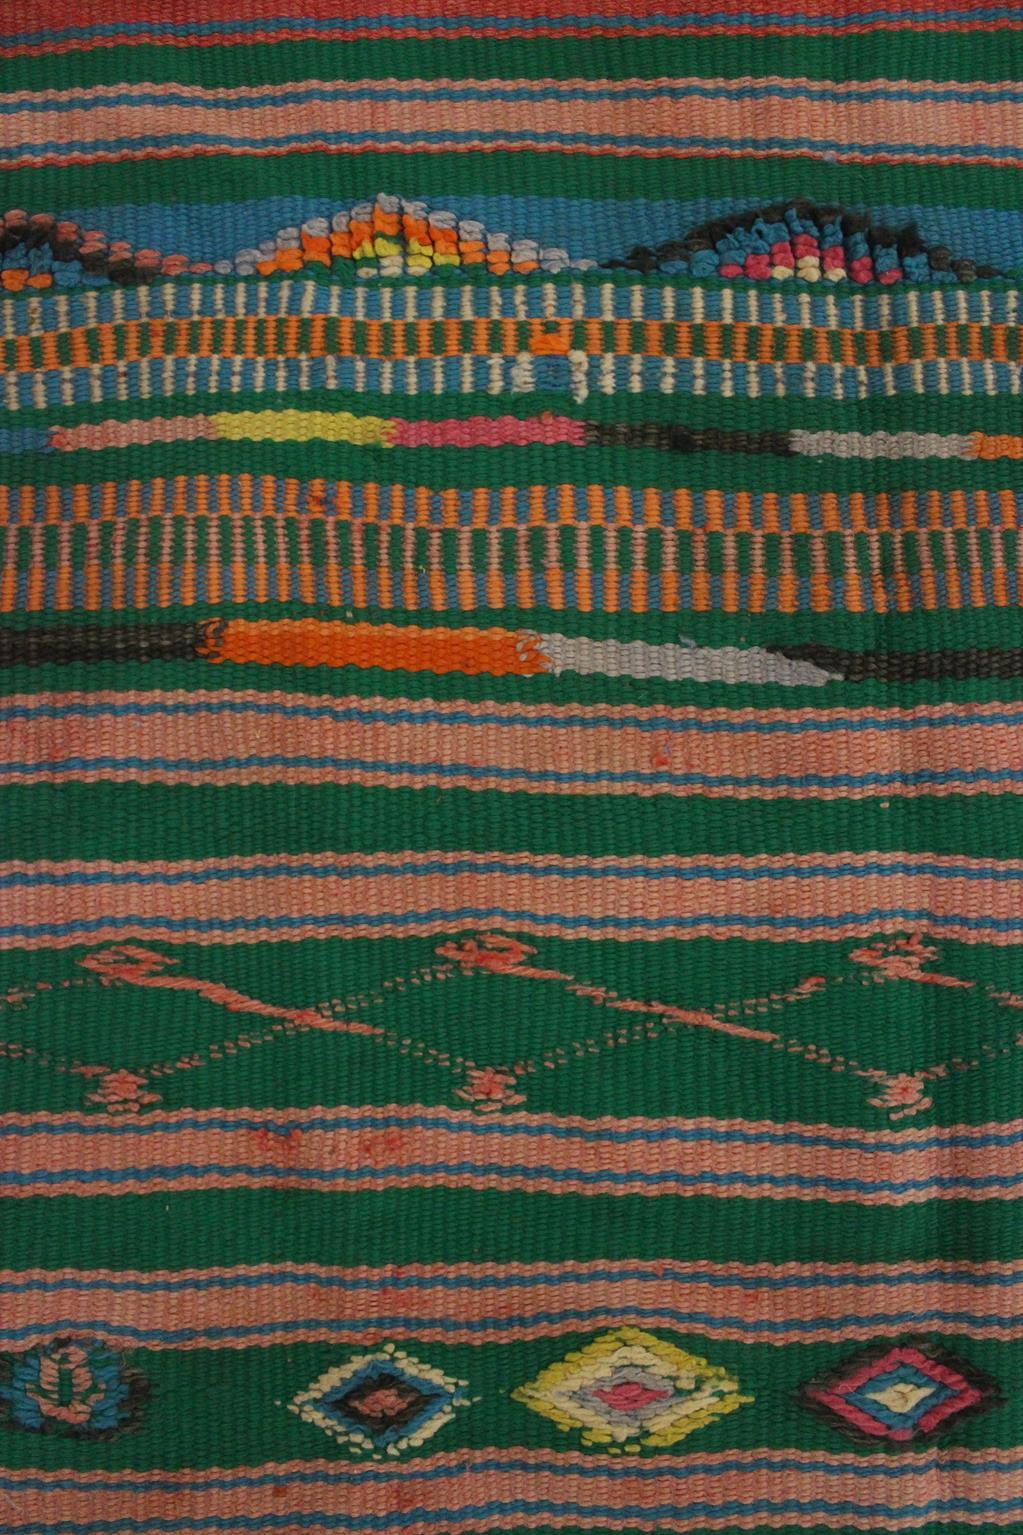 Vintage Moroccan striped kilim rug - Green/pink/red - 5.1x10.2feet / 157x312cm For Sale 1